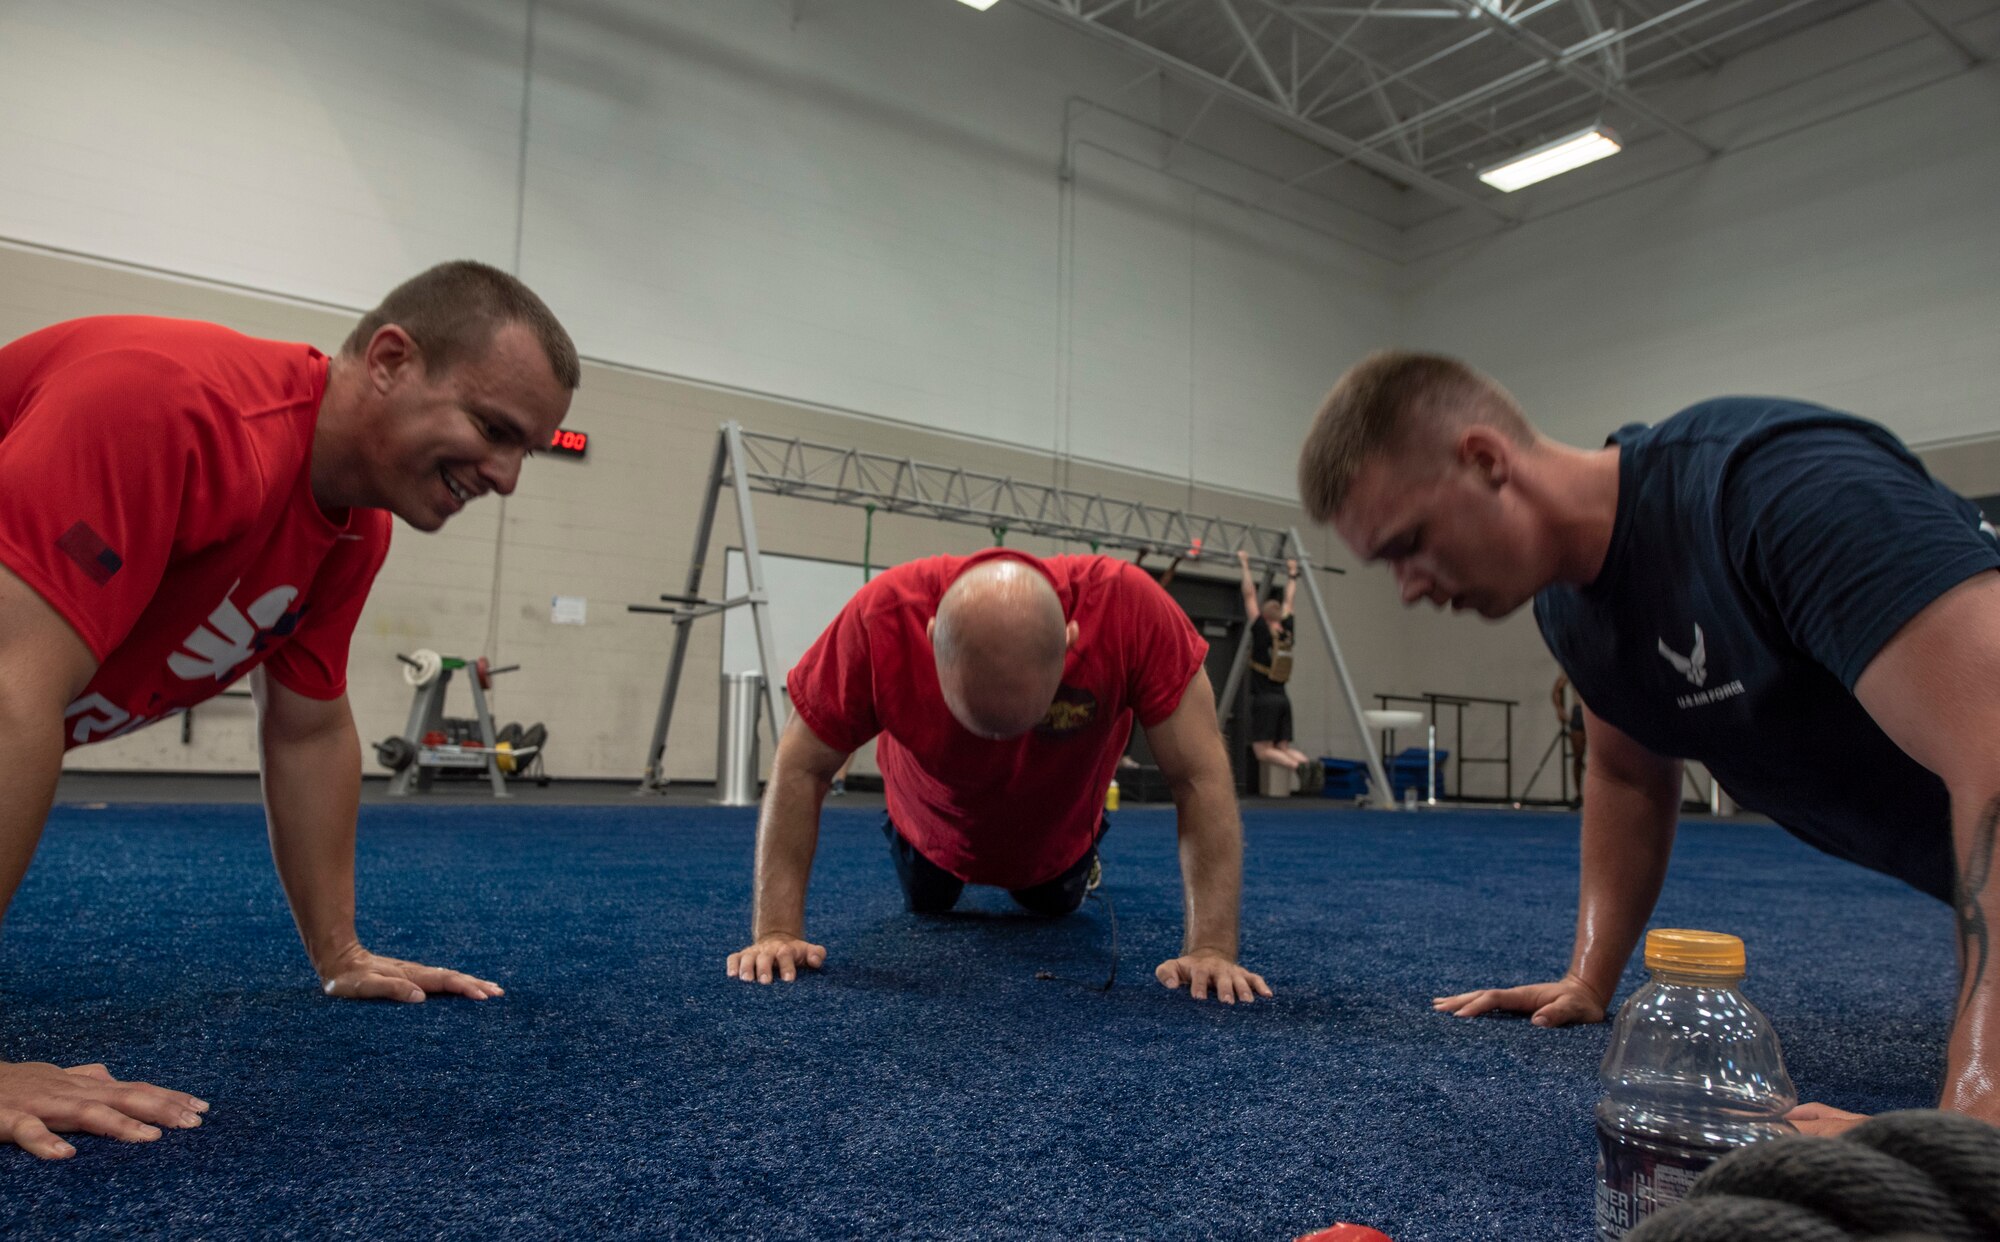 U.S. Airmen work together to complete a set of pushups during a “Murph challenge” at Shaw Air Force Base, May 28, South Carolina, 2019.